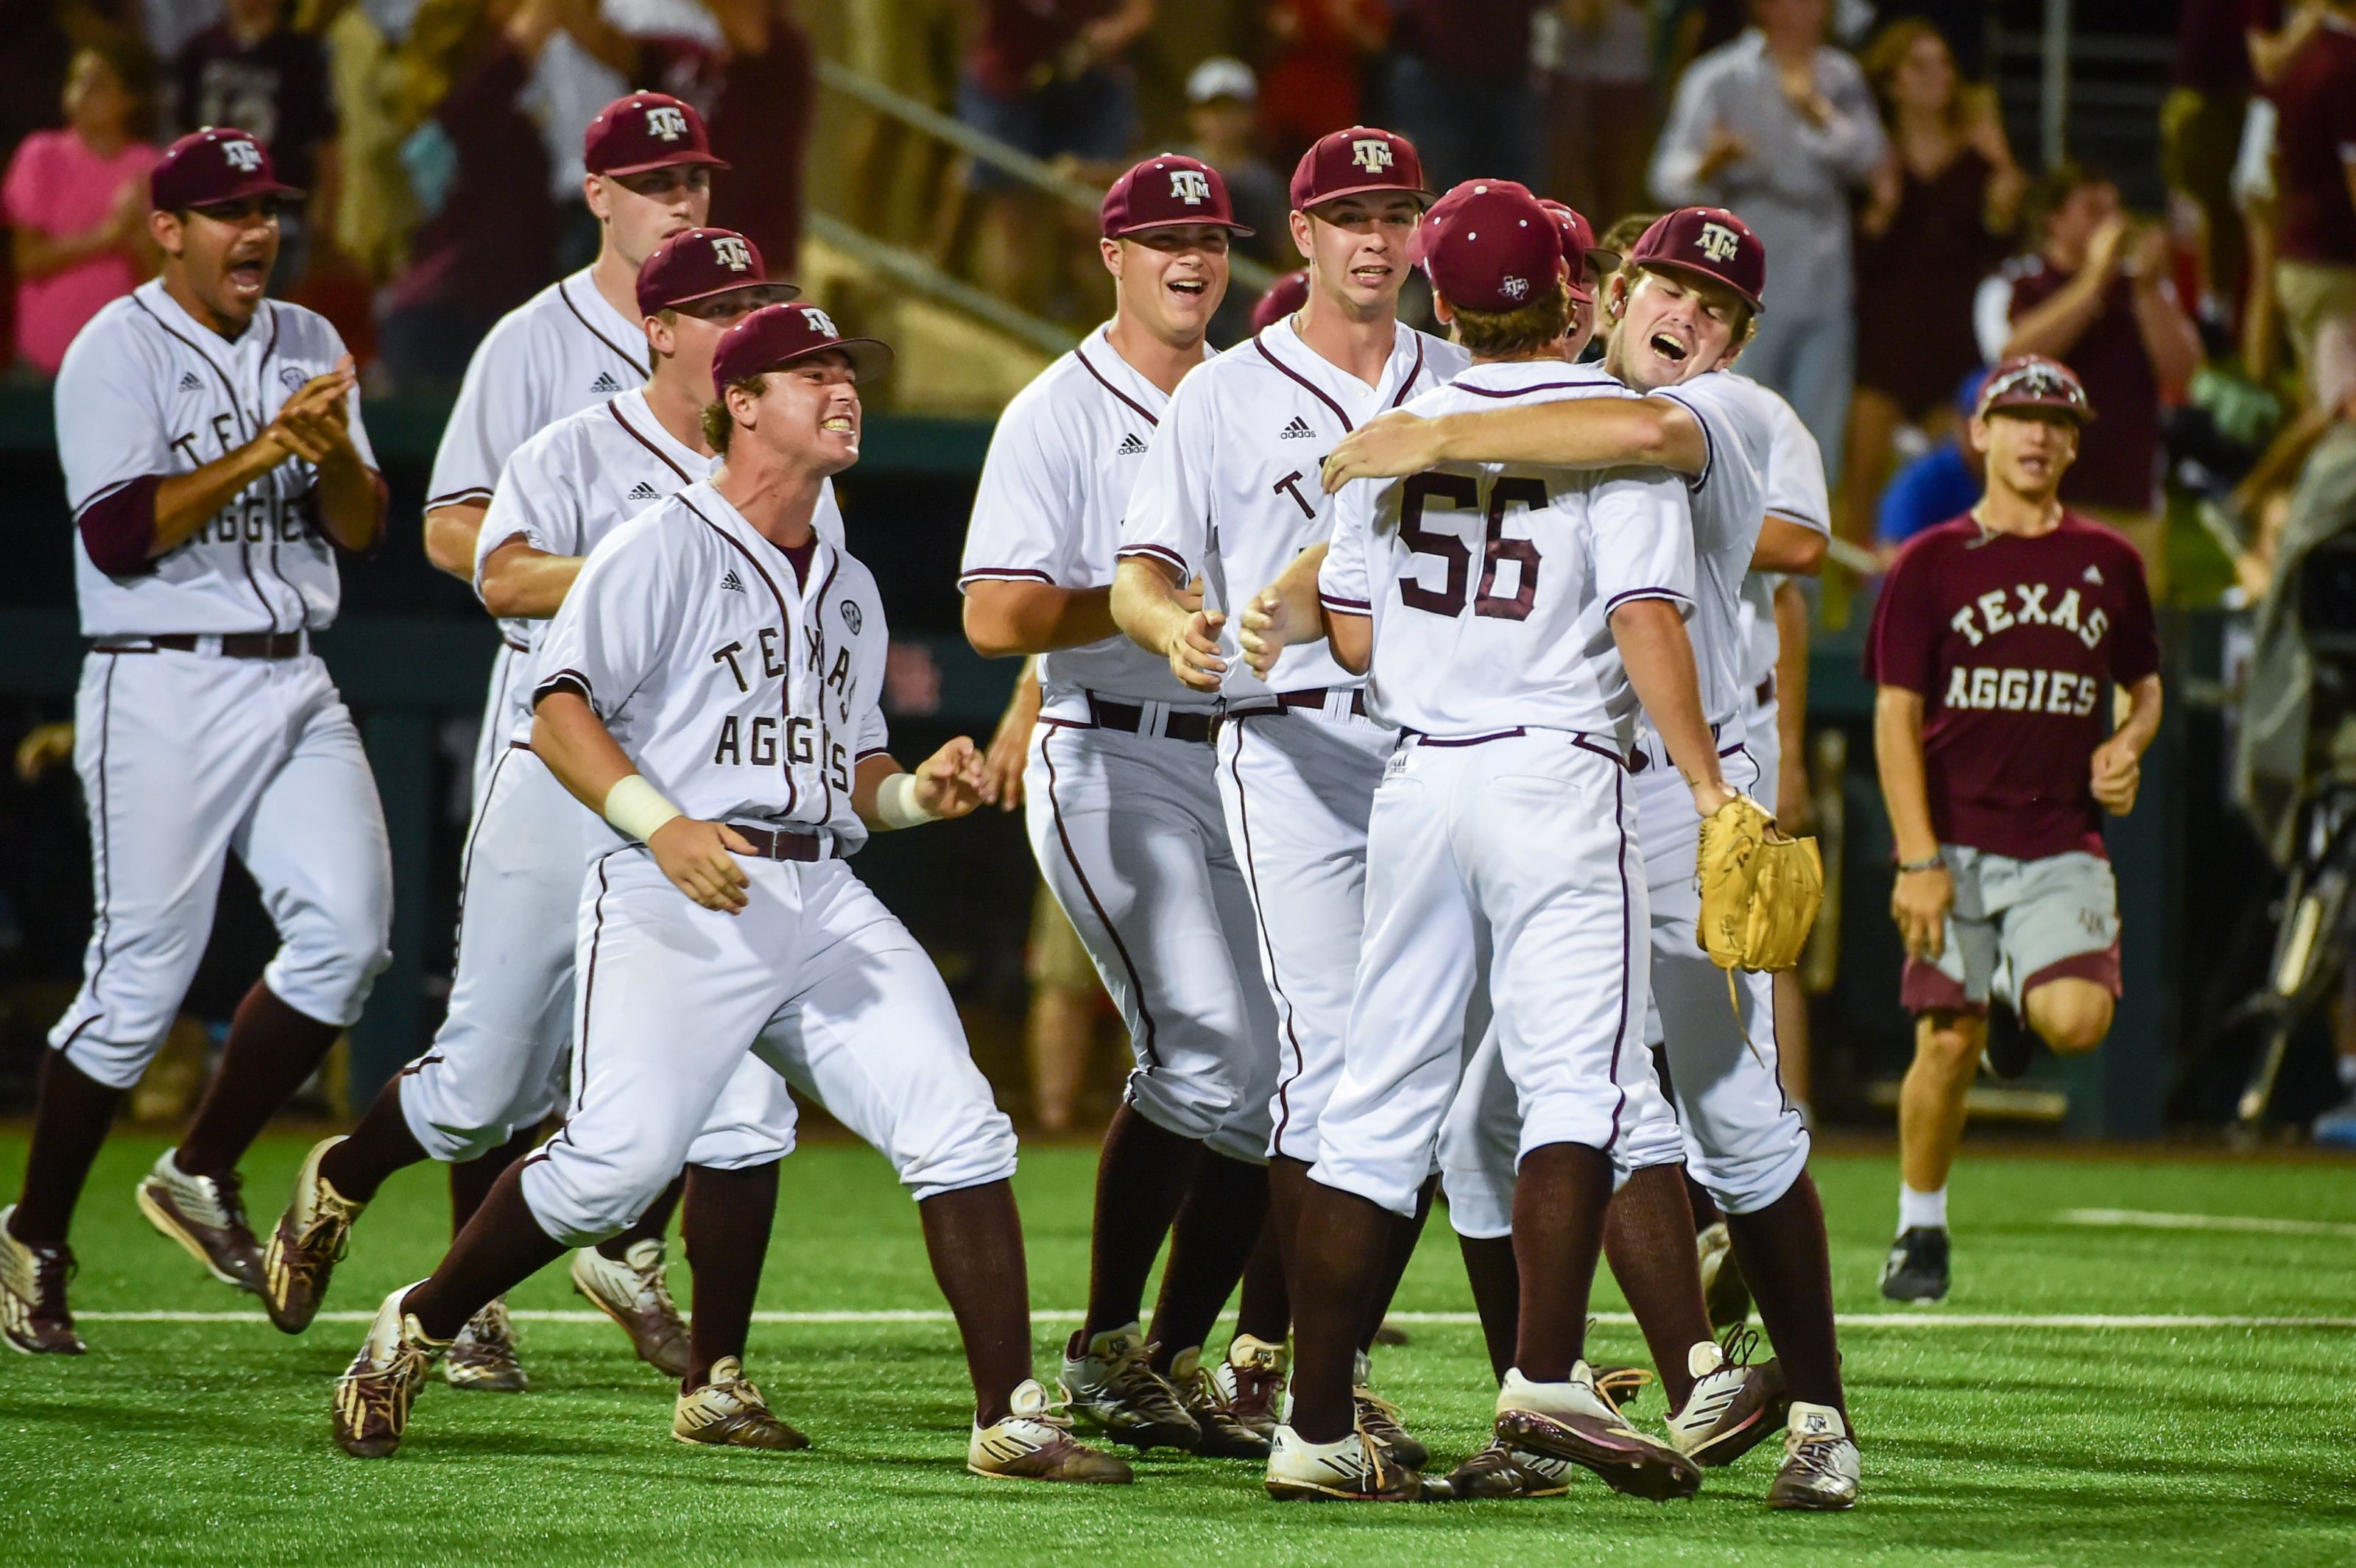 Texas A&M Baseball Aggies move up in polls with series win over No. 1